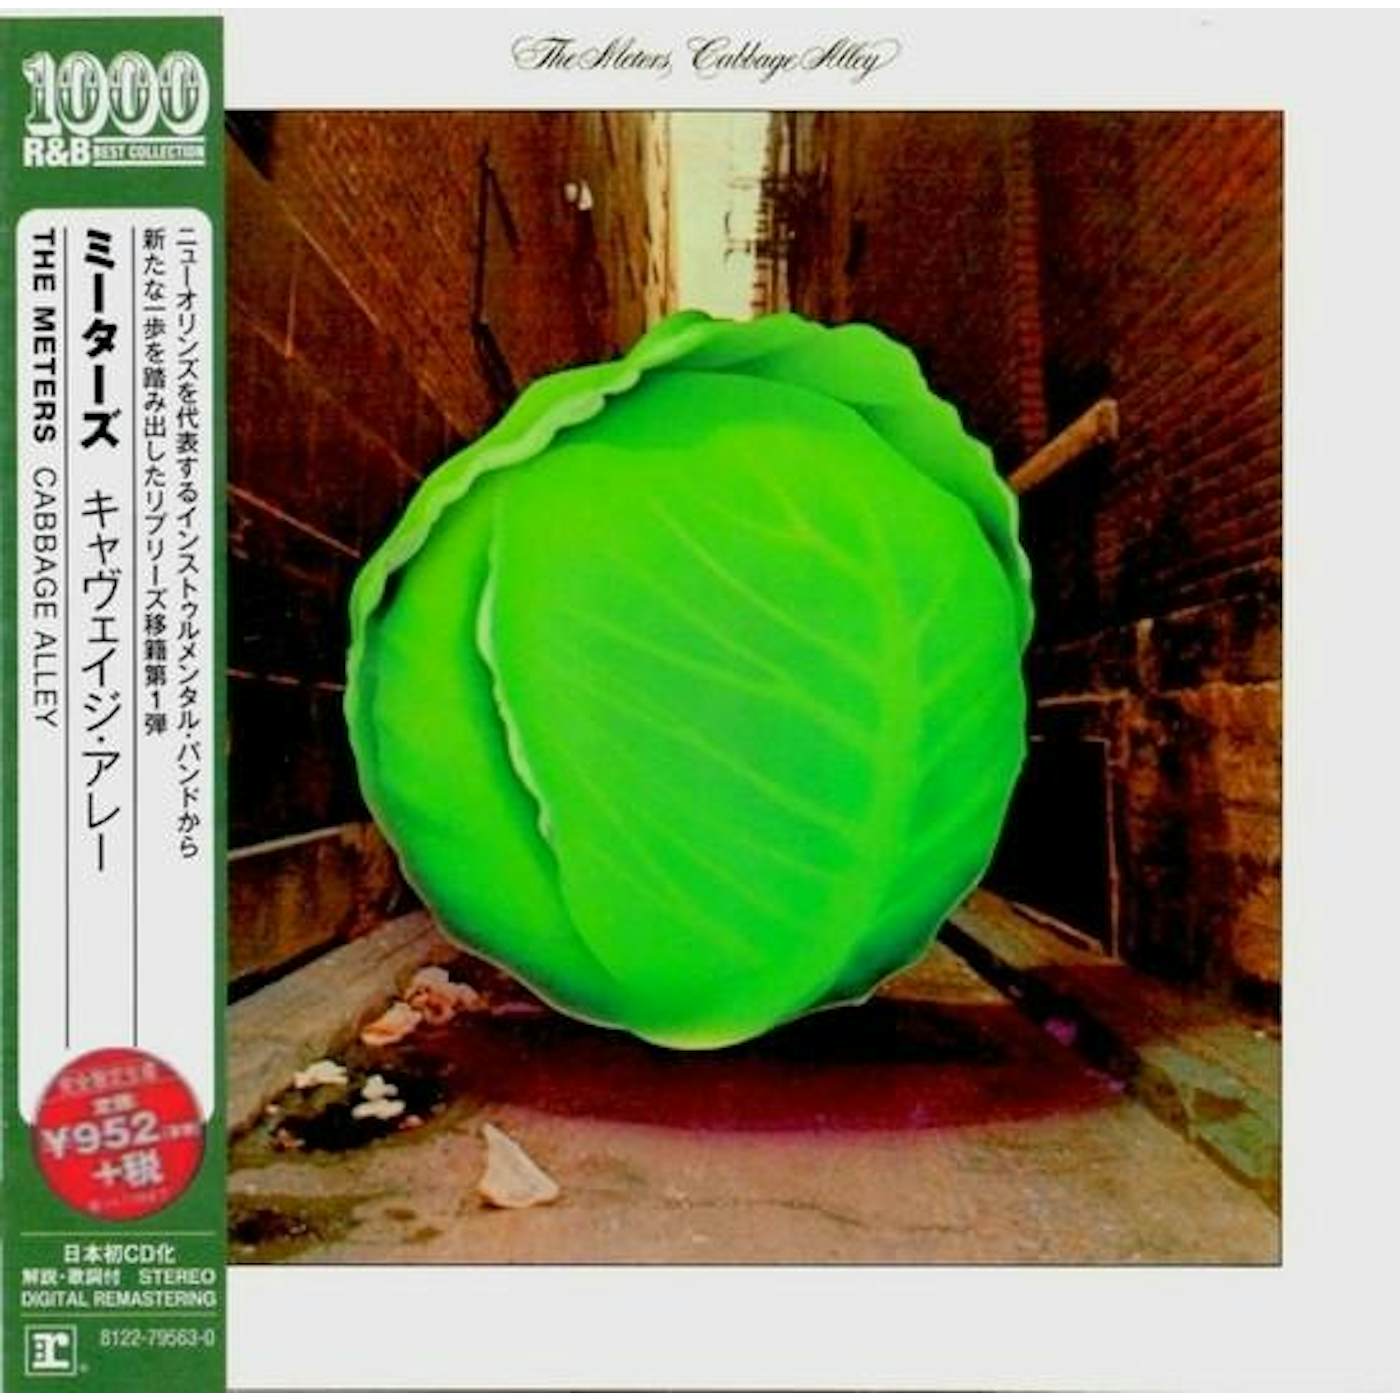 The Meters CABBAGE ALLEY CD